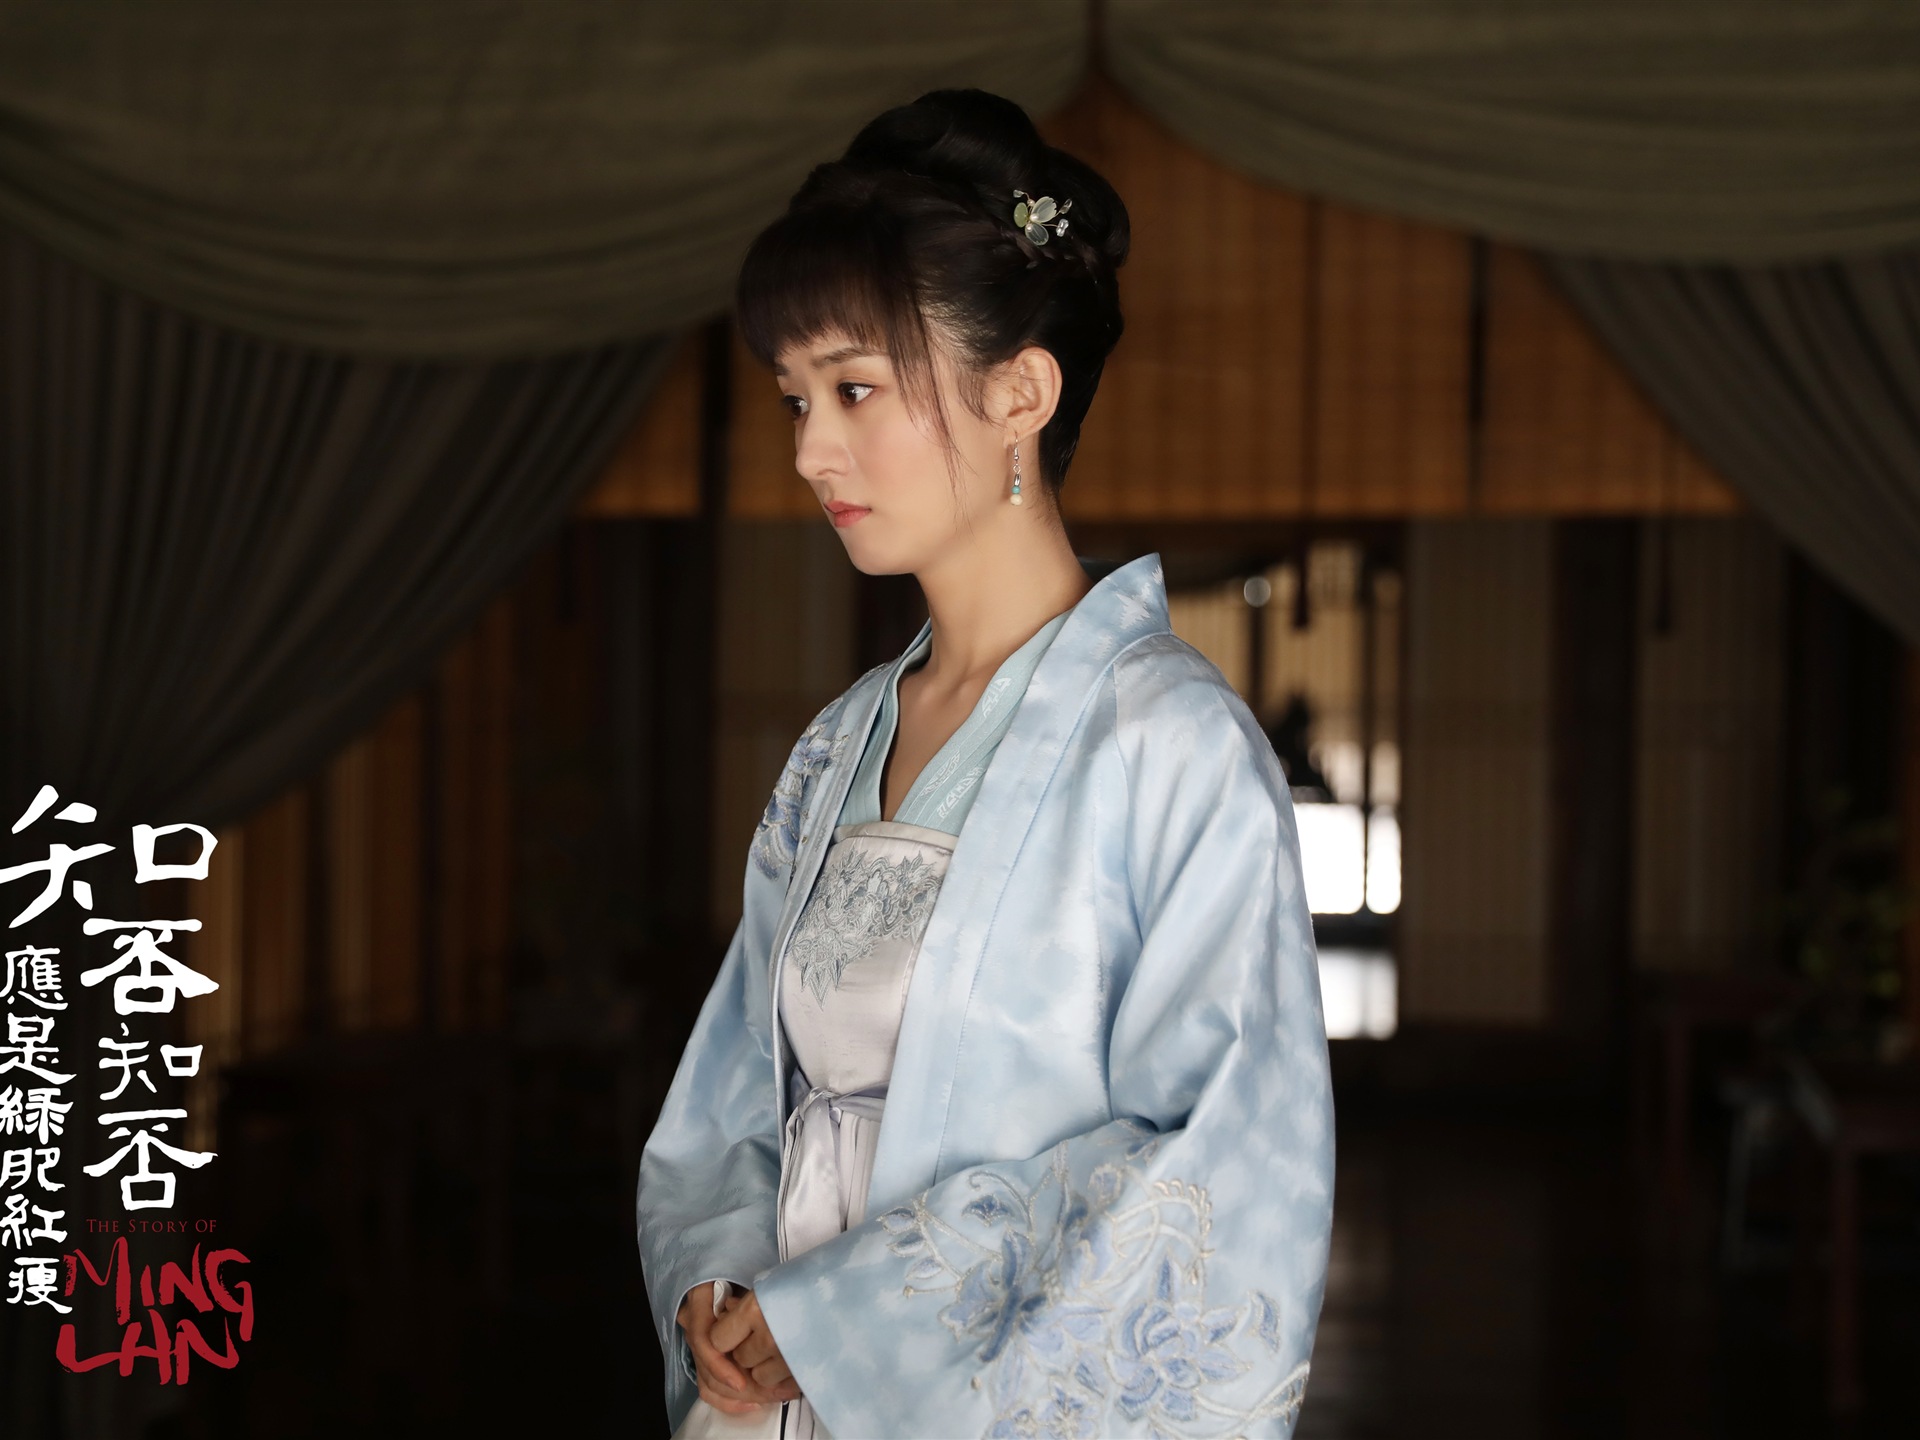 The Story Of MingLan, TV series HD wallpapers #45 - 1920x1440